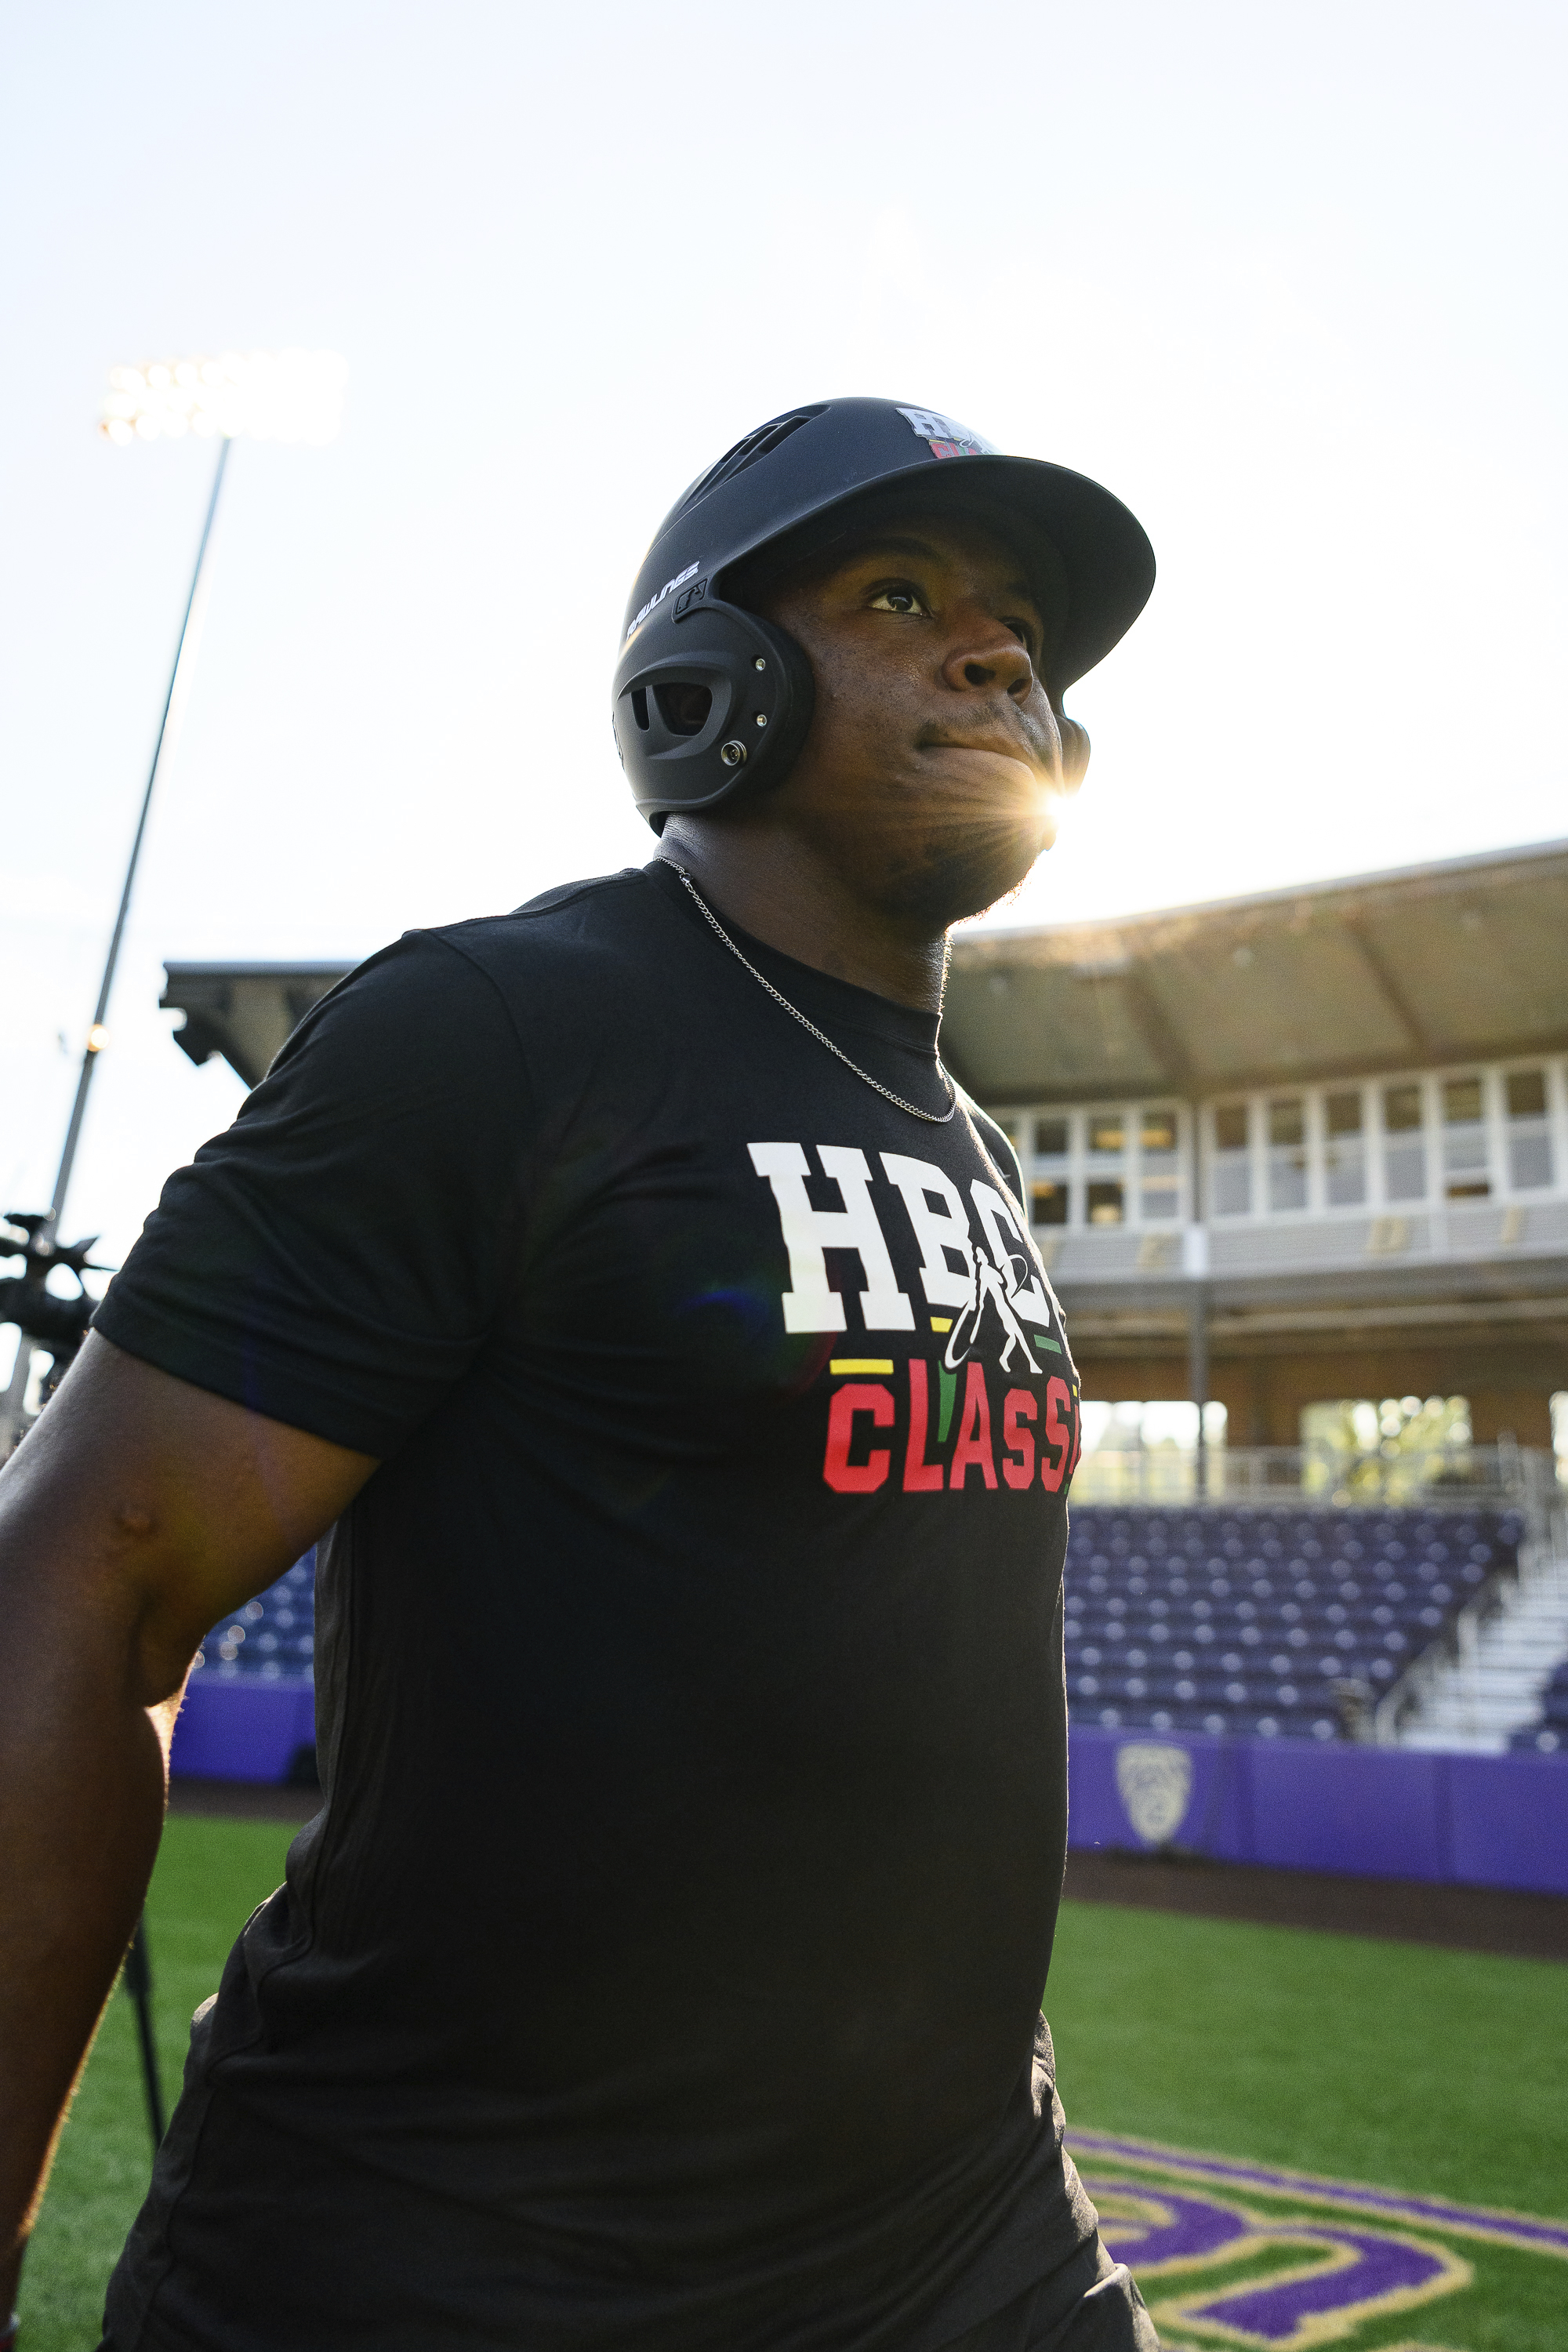 Griffey helping as MLB hopes HBCU game can create opportunity - Seattle  Sports